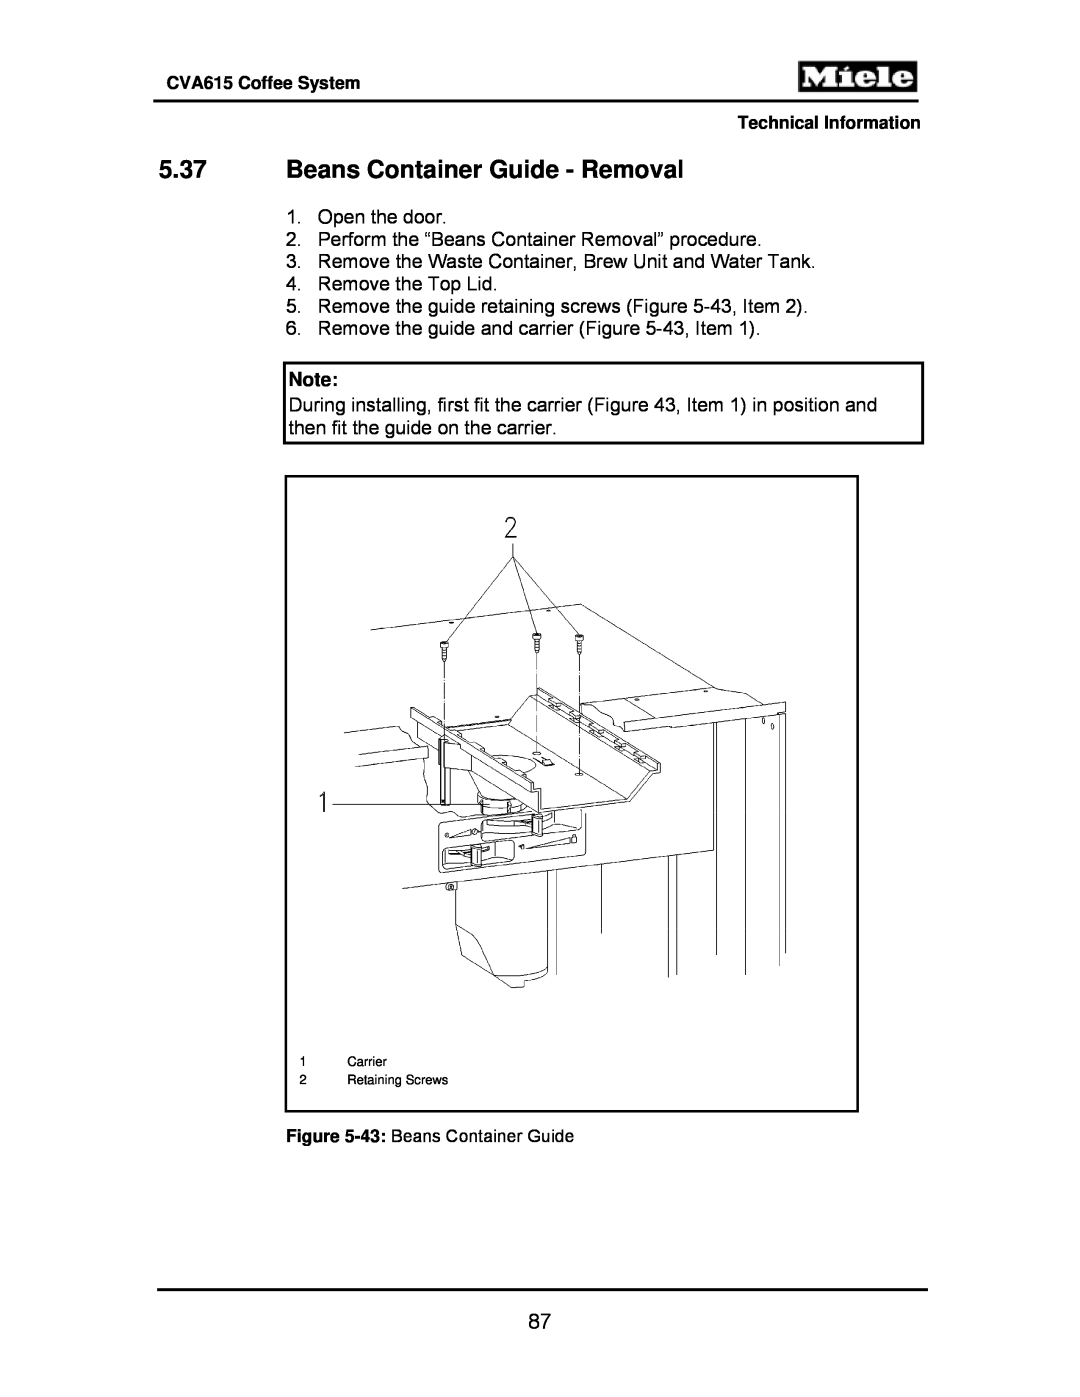 Miele CVA615 manual 5.37Beans Container Guide - Removal 